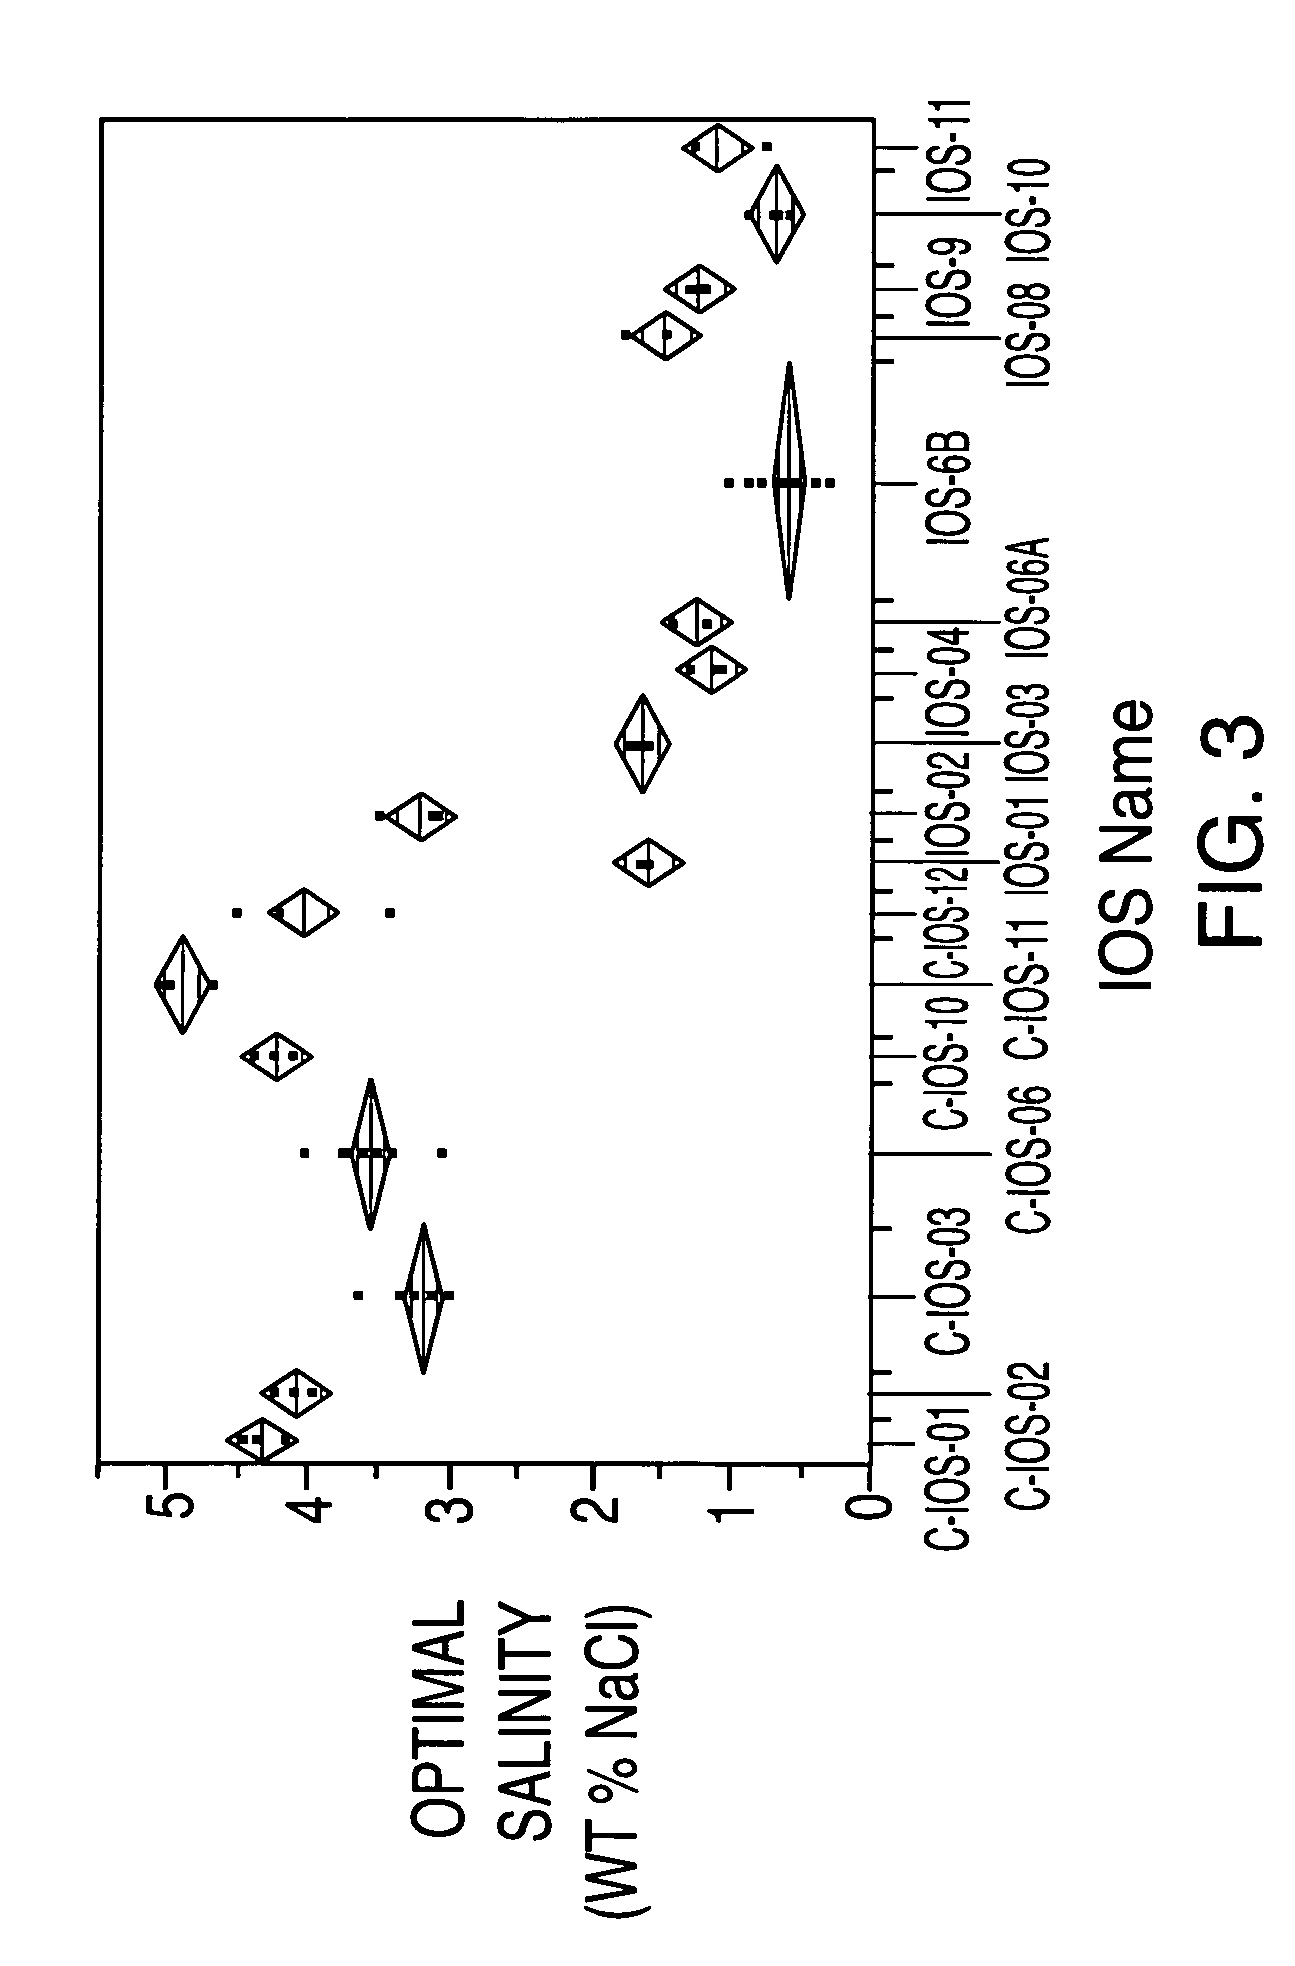 Sulfonated internal olefin surfactant for enhanced oil recovery